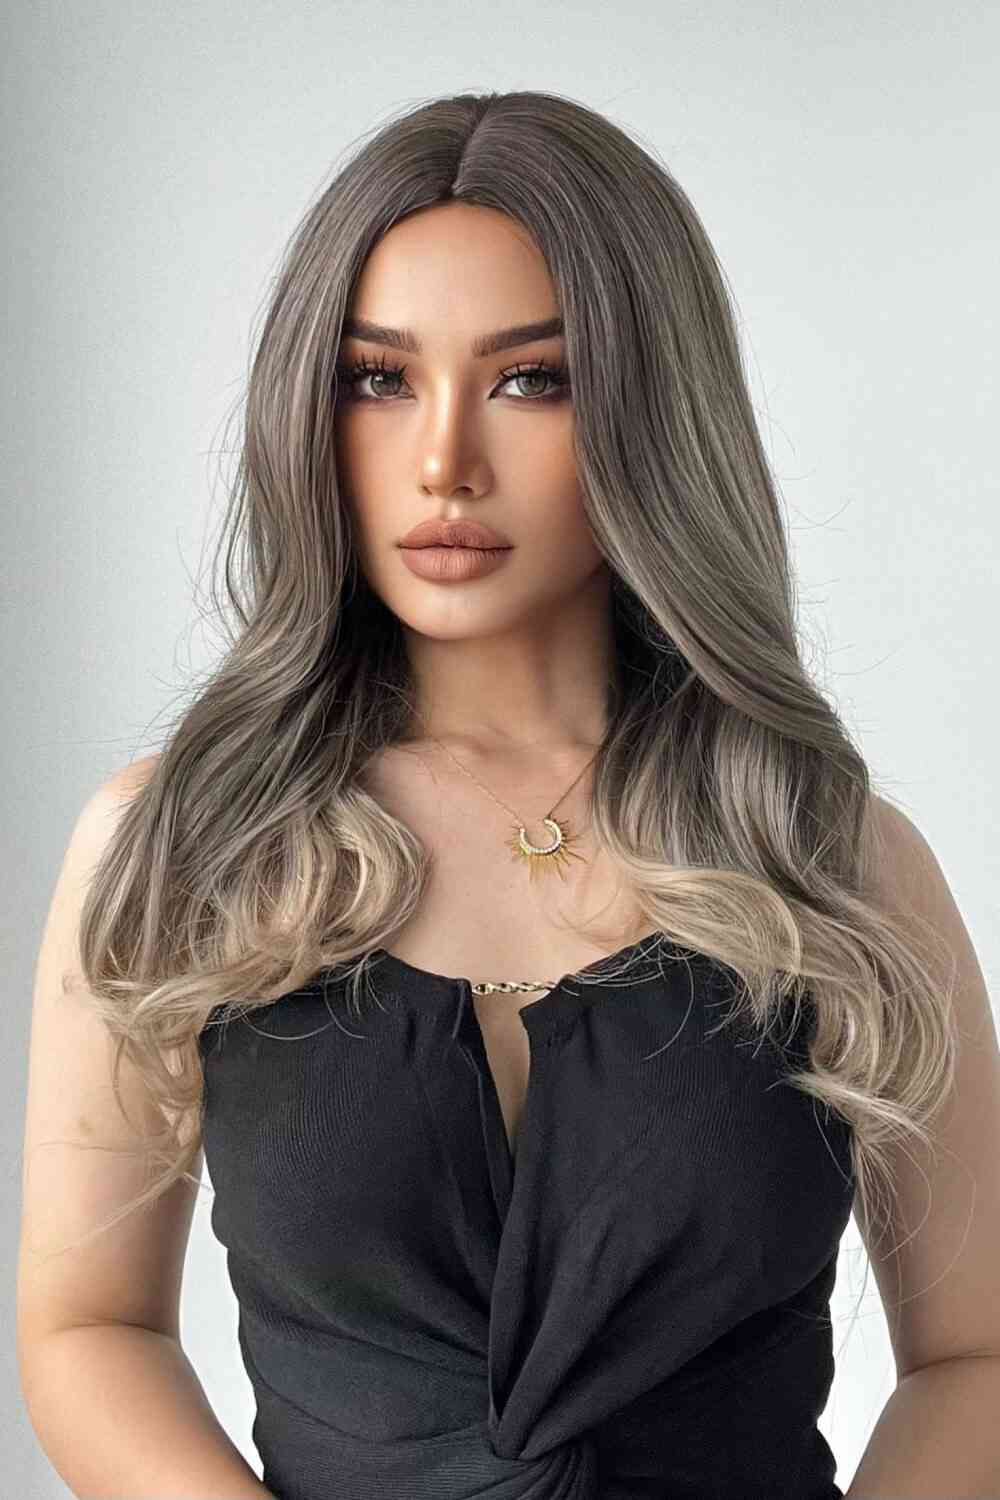 13*1" Full-Machine Wigs Synthetic Long Straight 24" - lolaluxeshop